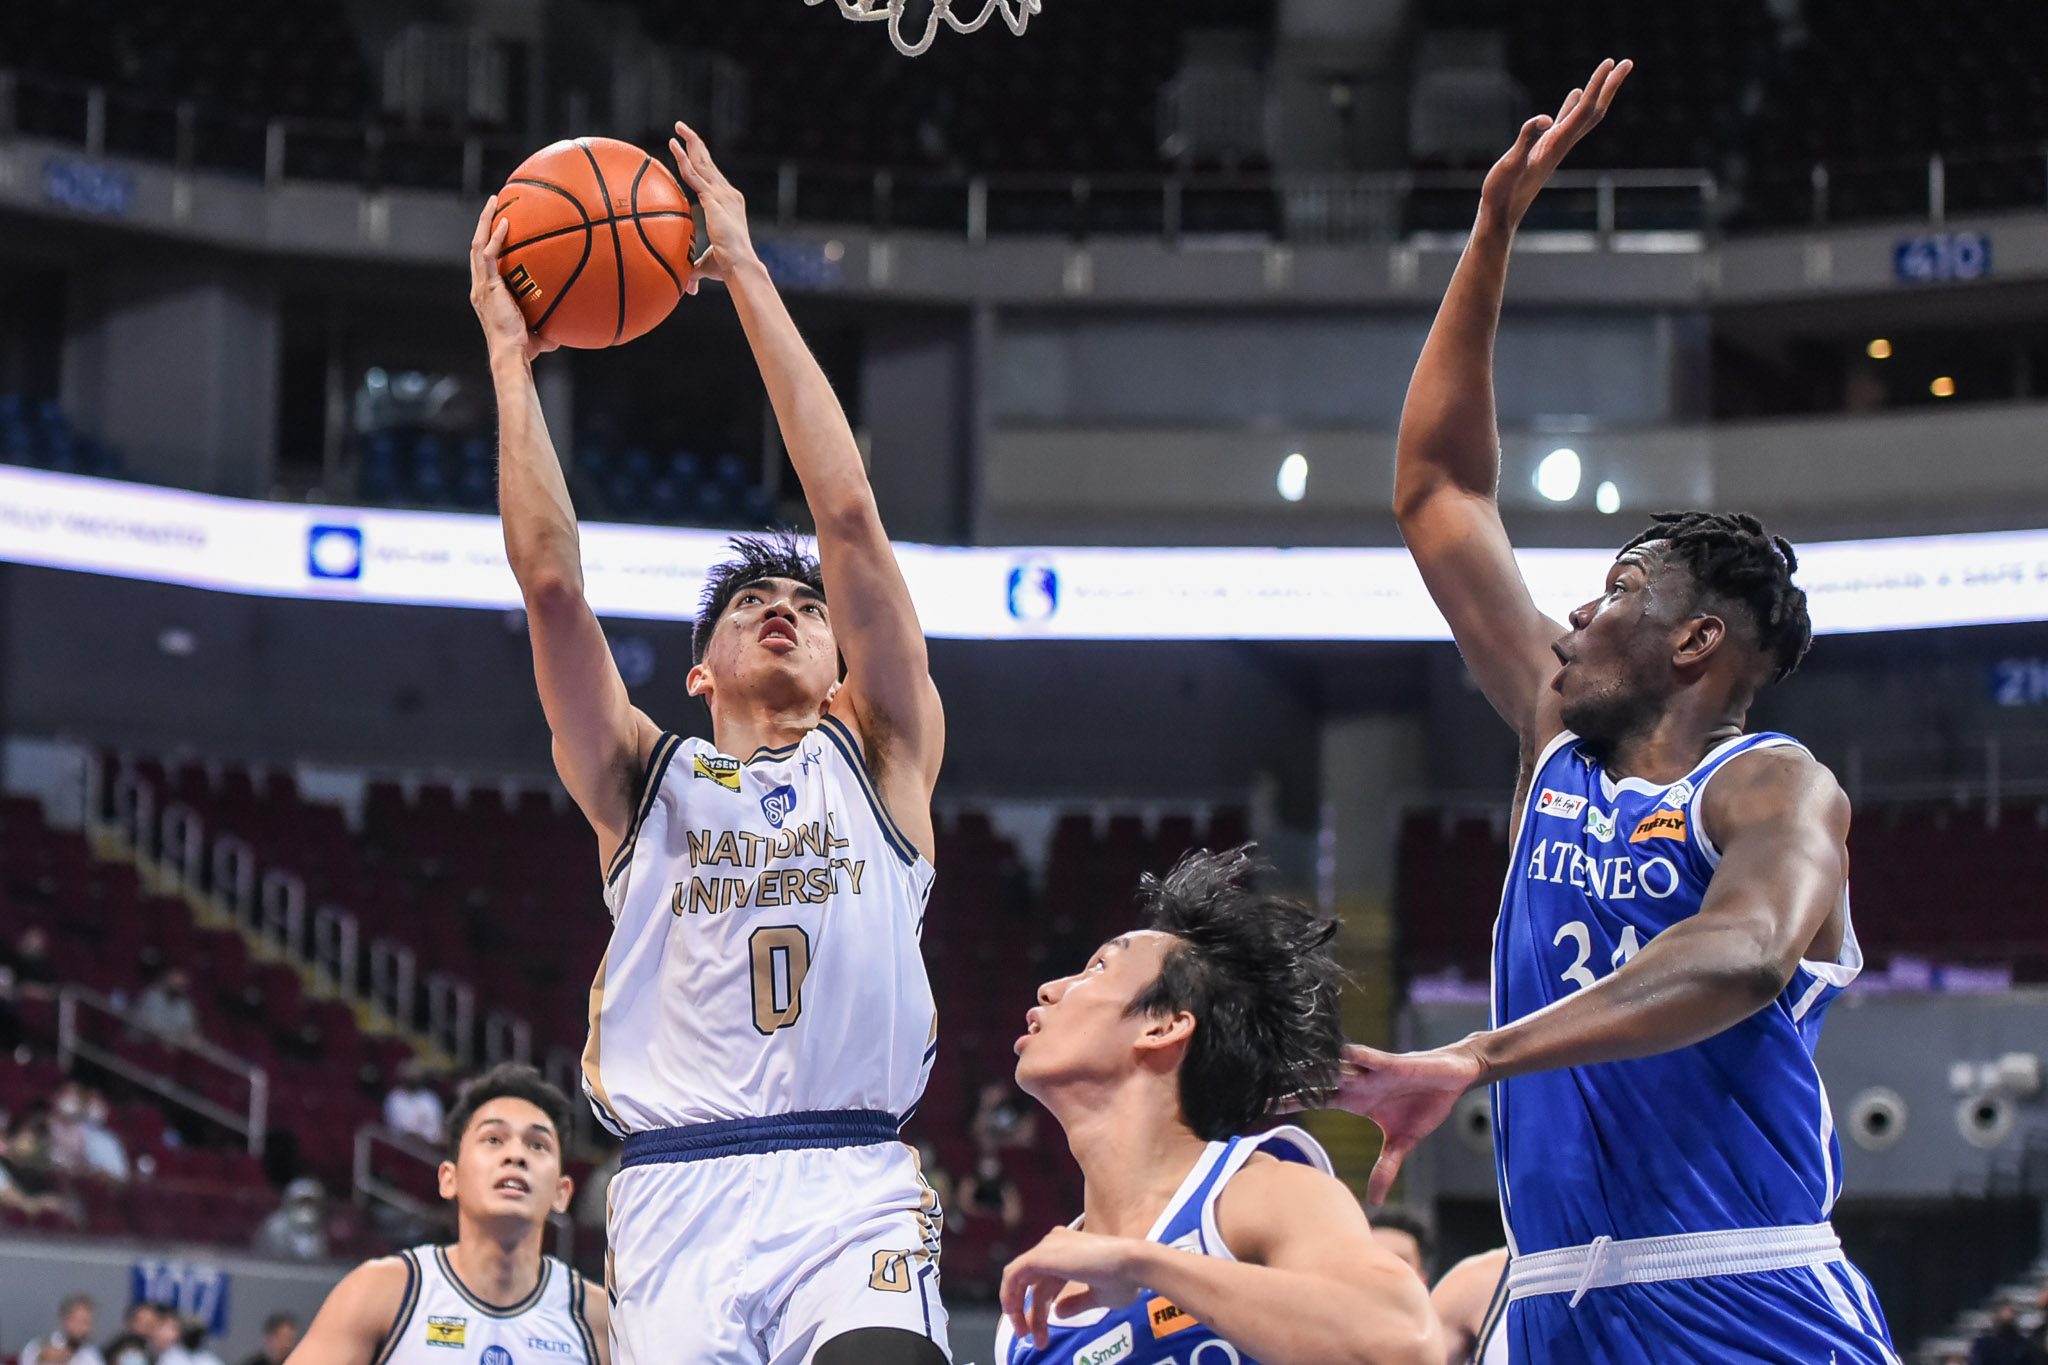 NU snaps 10-game, 6-year skid over Ateneo, takes solo second place